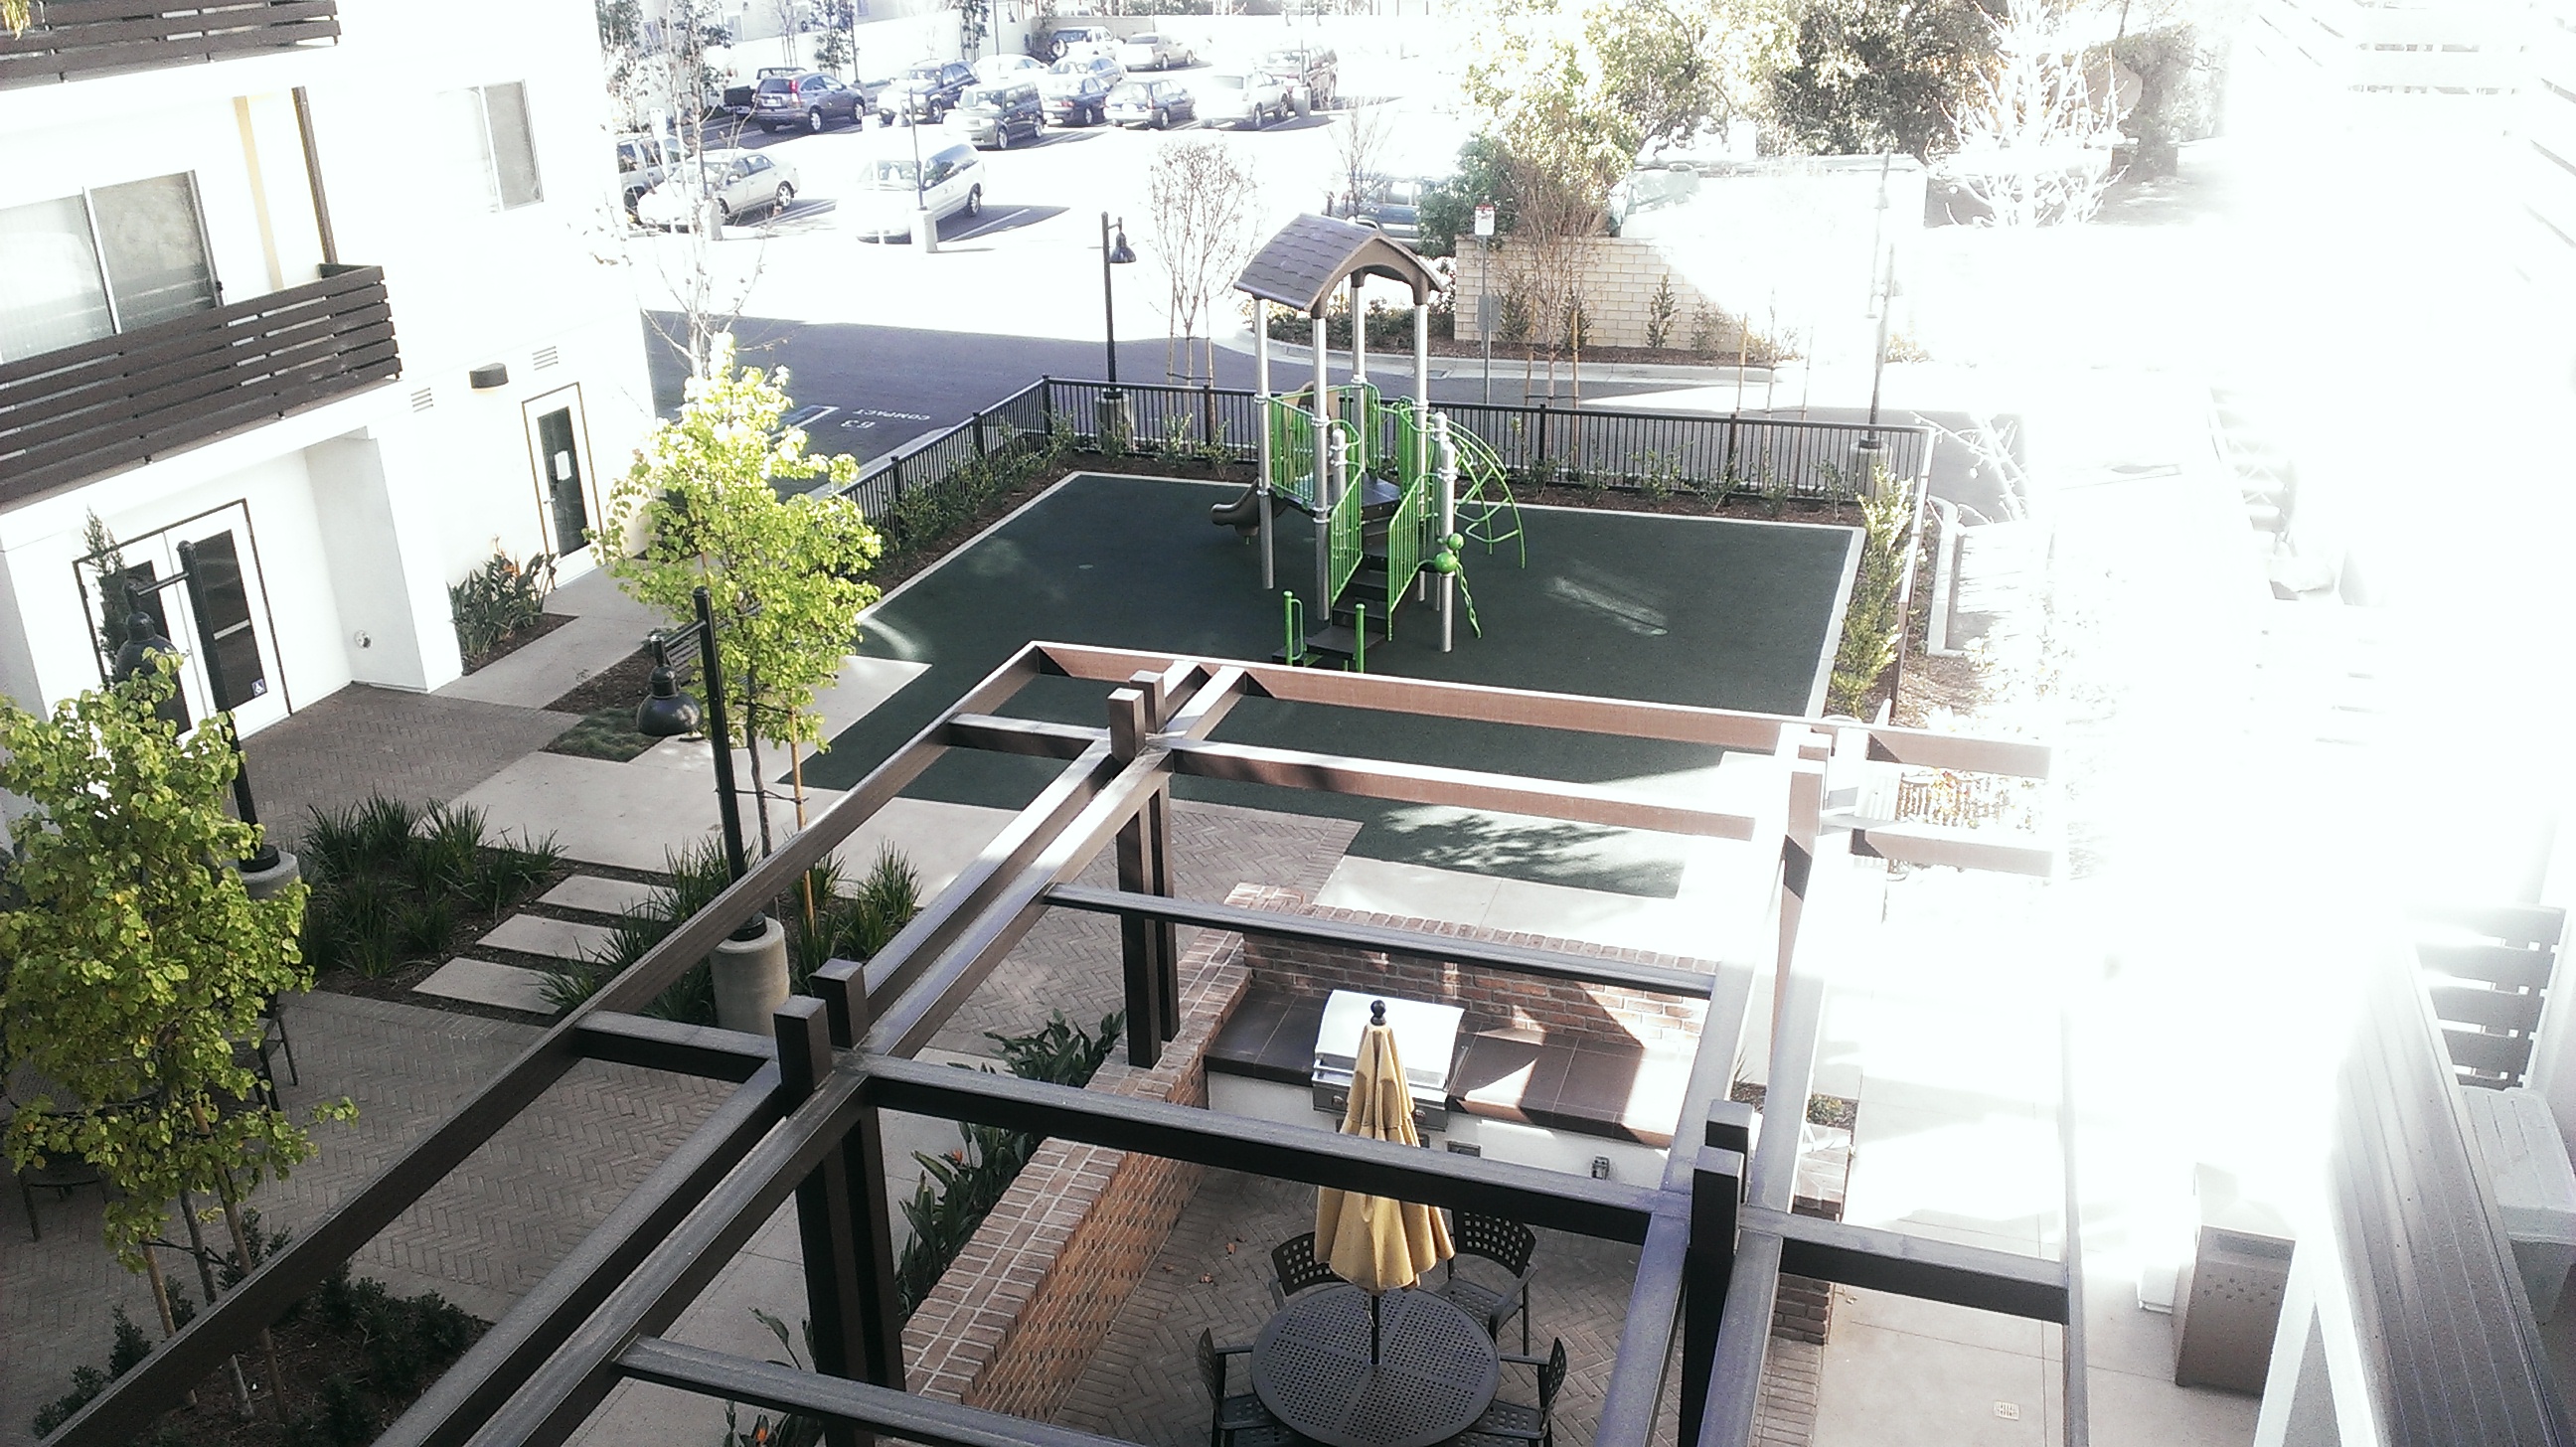 Top view of a courtyard with a small playground and a grill with a table. There is multiple plants around the area. Courtyard is adjacent to an outdoor parking lot.